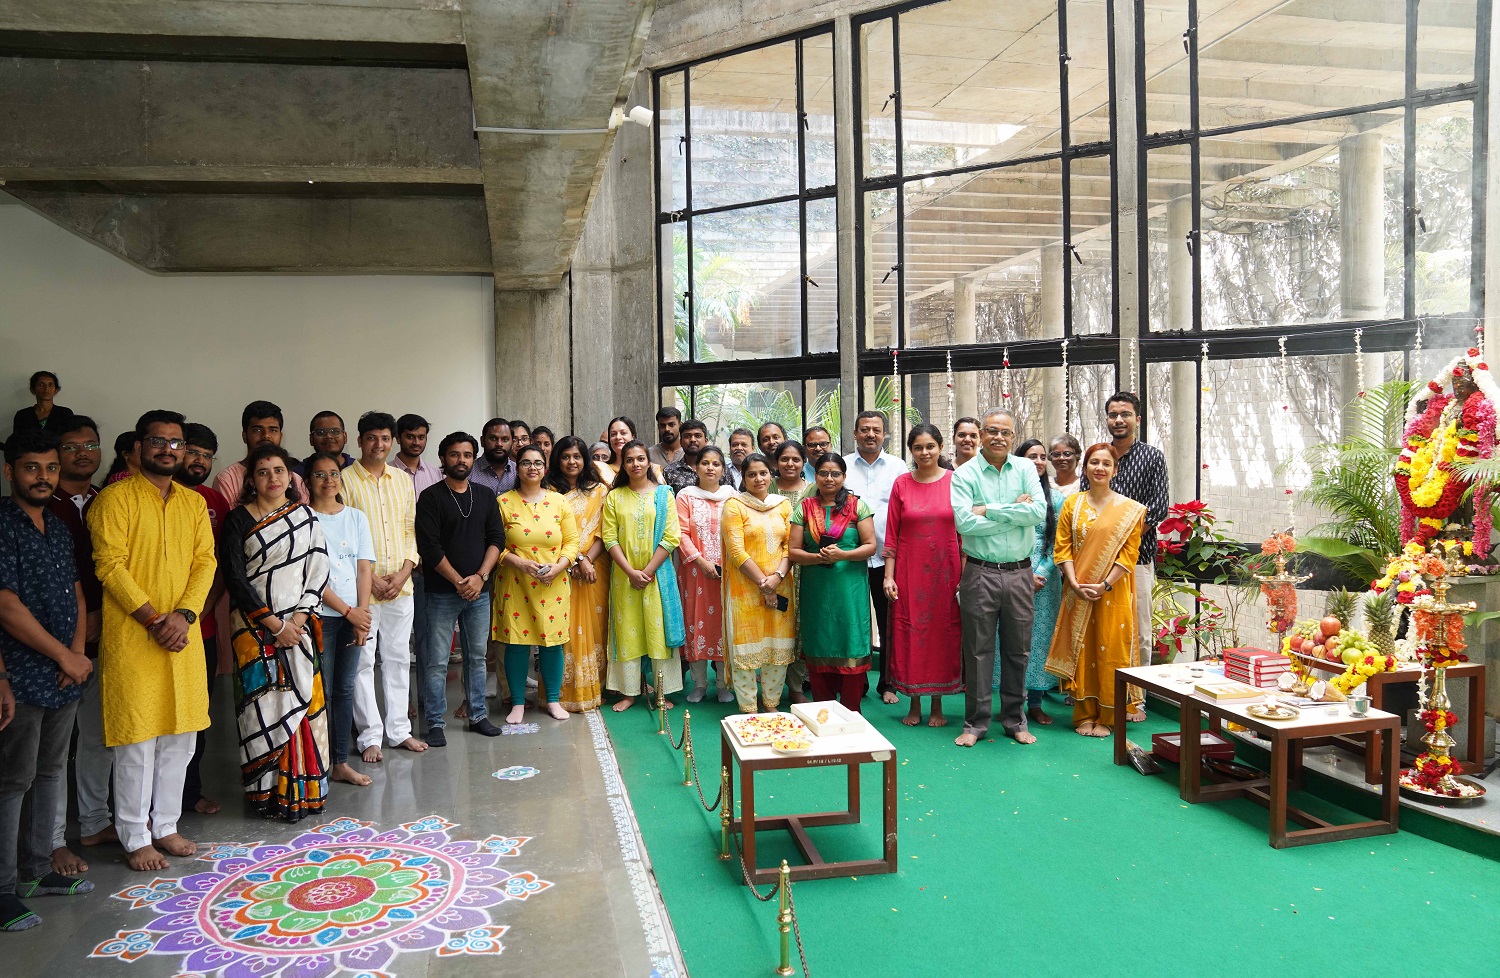 Students and staff celebrate Basant Panchami, welcoming the season of Spring and paying tribute to learning and knowledge, on 14th February at the IIMB library.